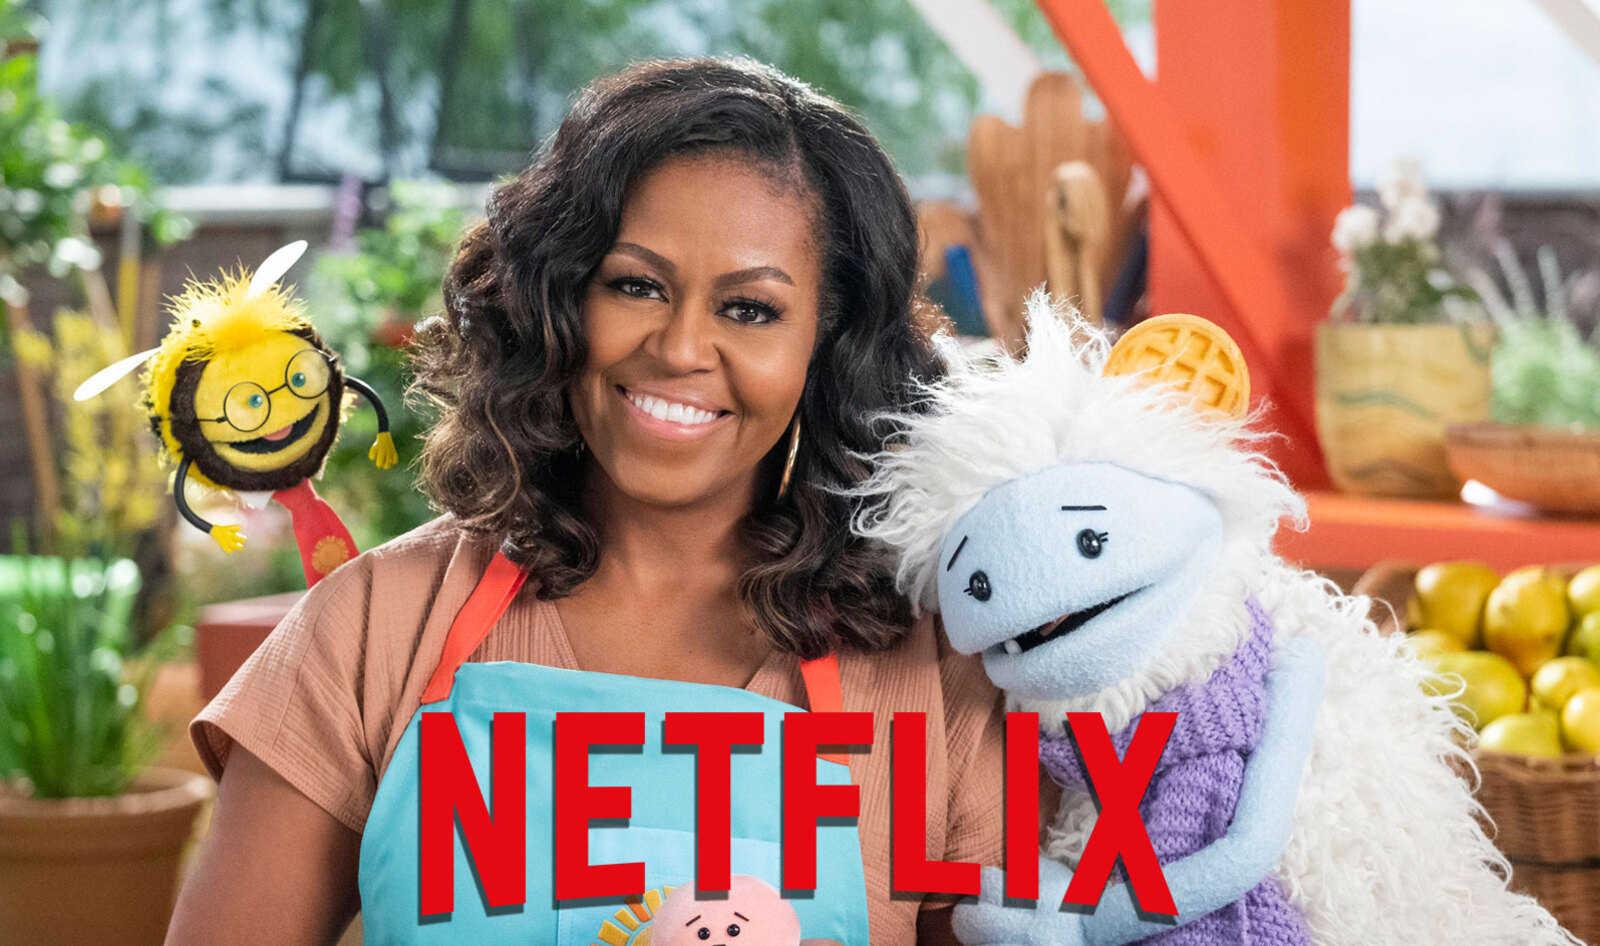 I Netflix'd Michelle Obama's 'Waffles + Mochi:' 5 Food Things It Got Right and One Big Miss